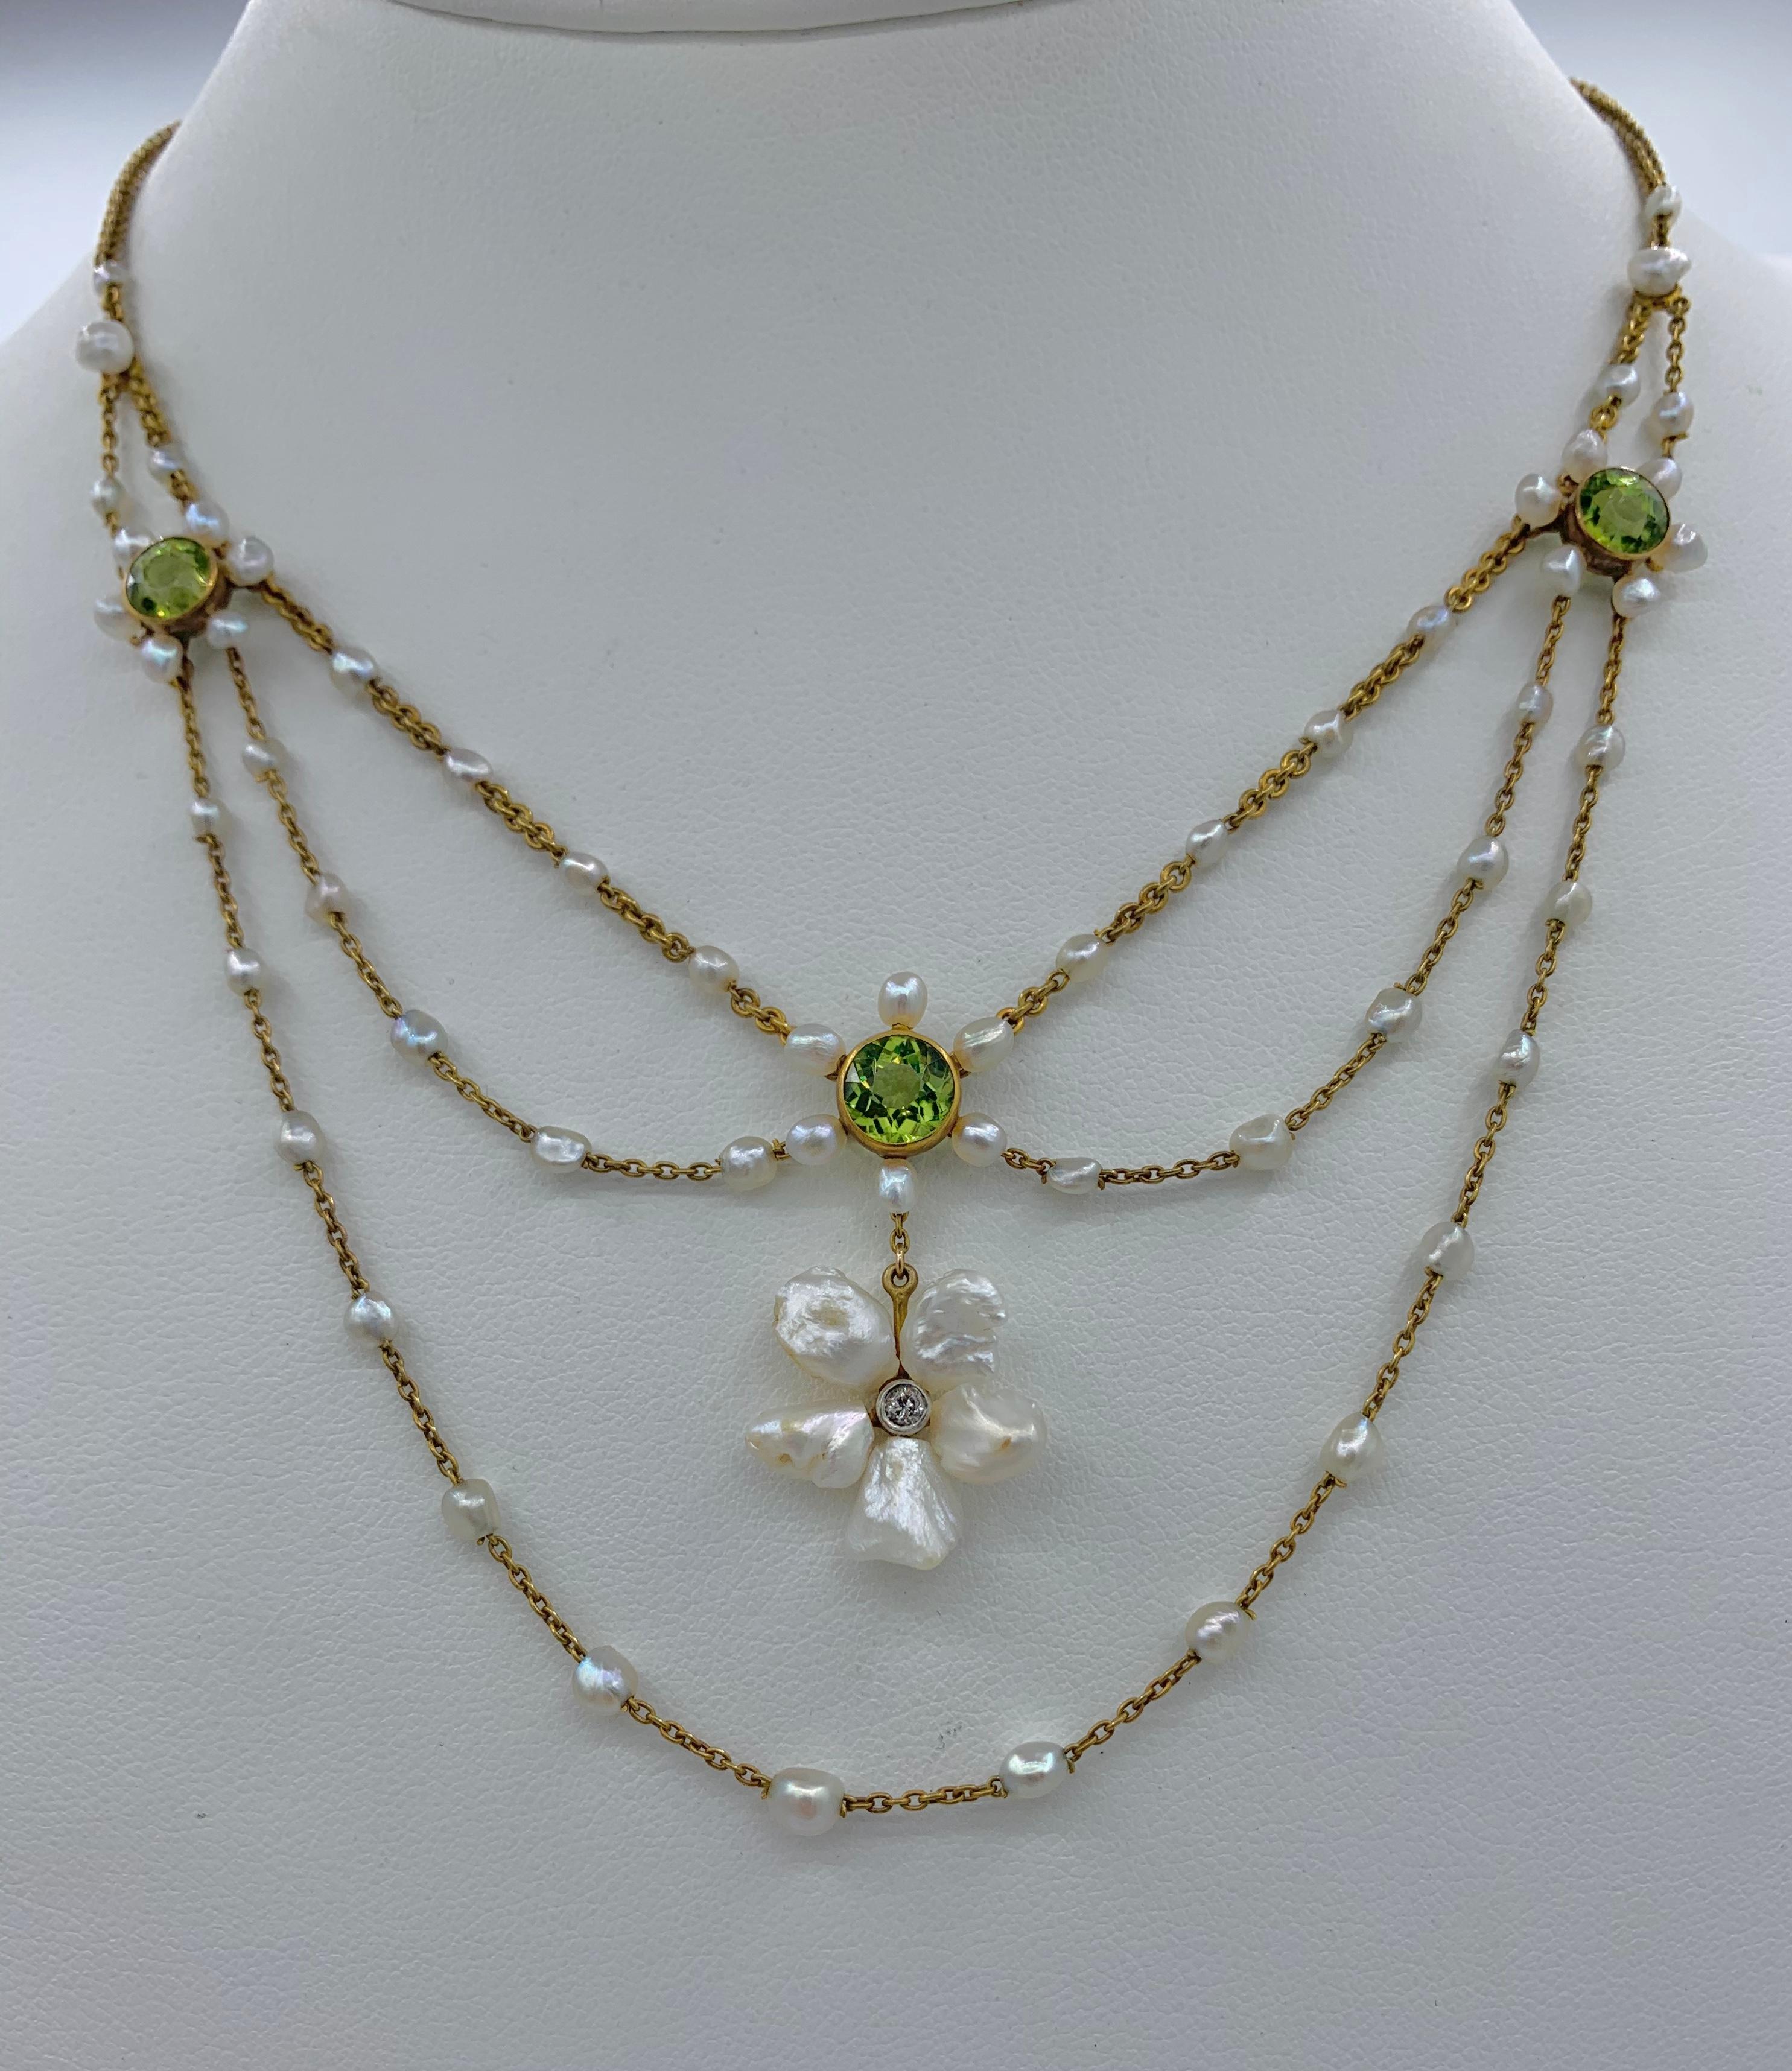 THIS IS A STUNNING VICTORIAN - ART NOUVEAU - BELLE EPOQUE FESTOON NECKLACE WITH THE MOST GORGEOUS NATURAL ROUND FACETED PERIDOT GEMS SET WITH PEARLS AND AN OLD MINE DIAMOND IN A GORGEOUS FLOWER MOTIF FESTOON SWAG DESIGN IN 14 KARAT GOLD.   THE